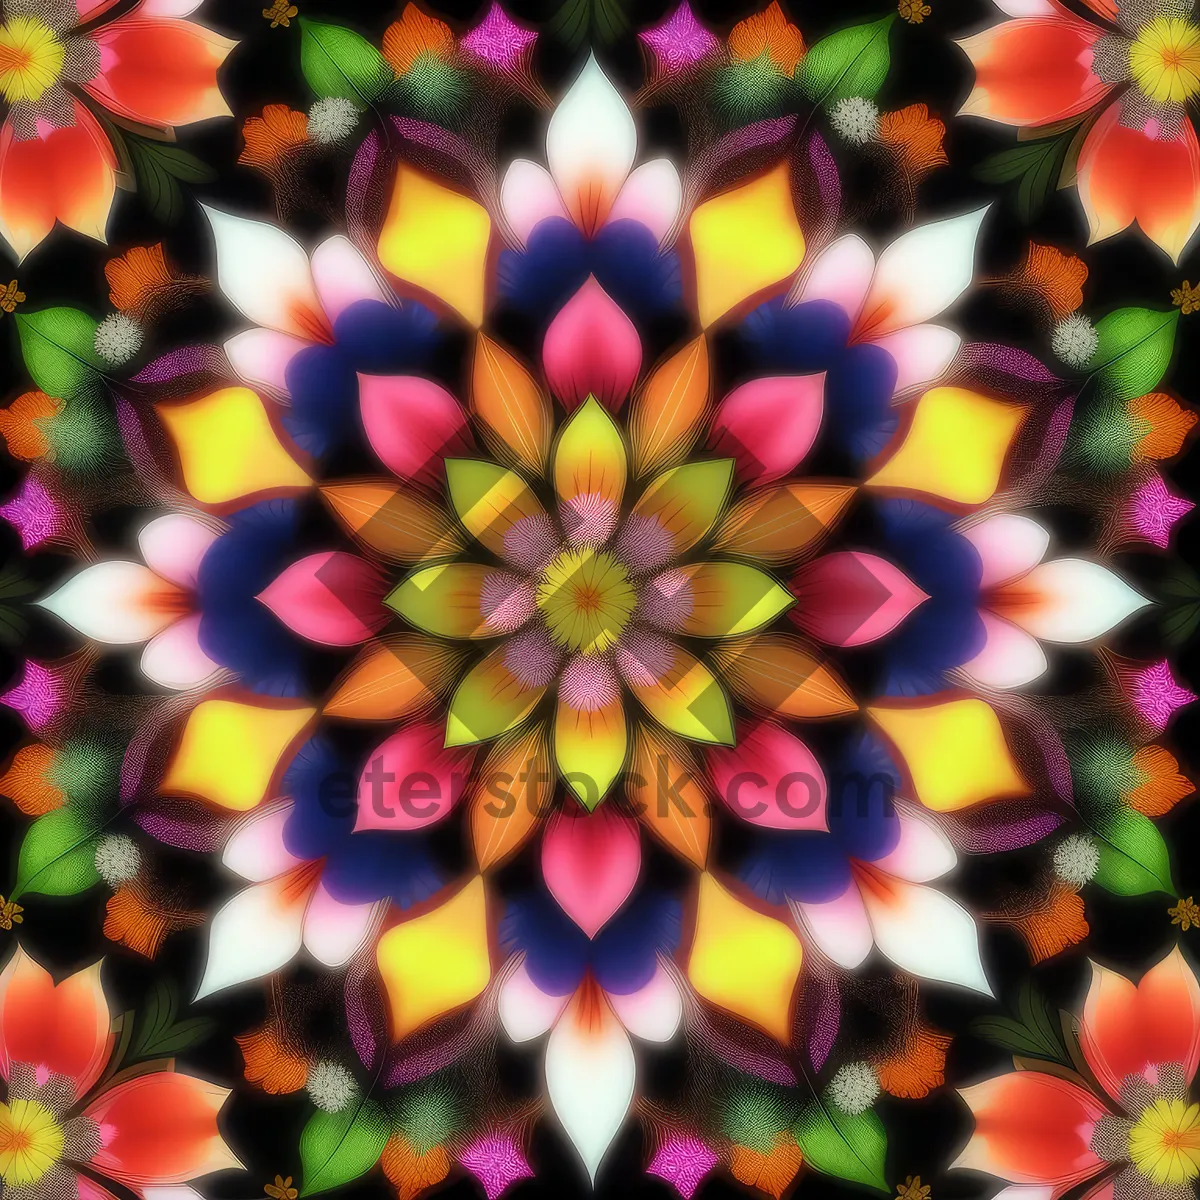 Picture of Vibrant Pinwheel Pattern in Colorful Celebration.